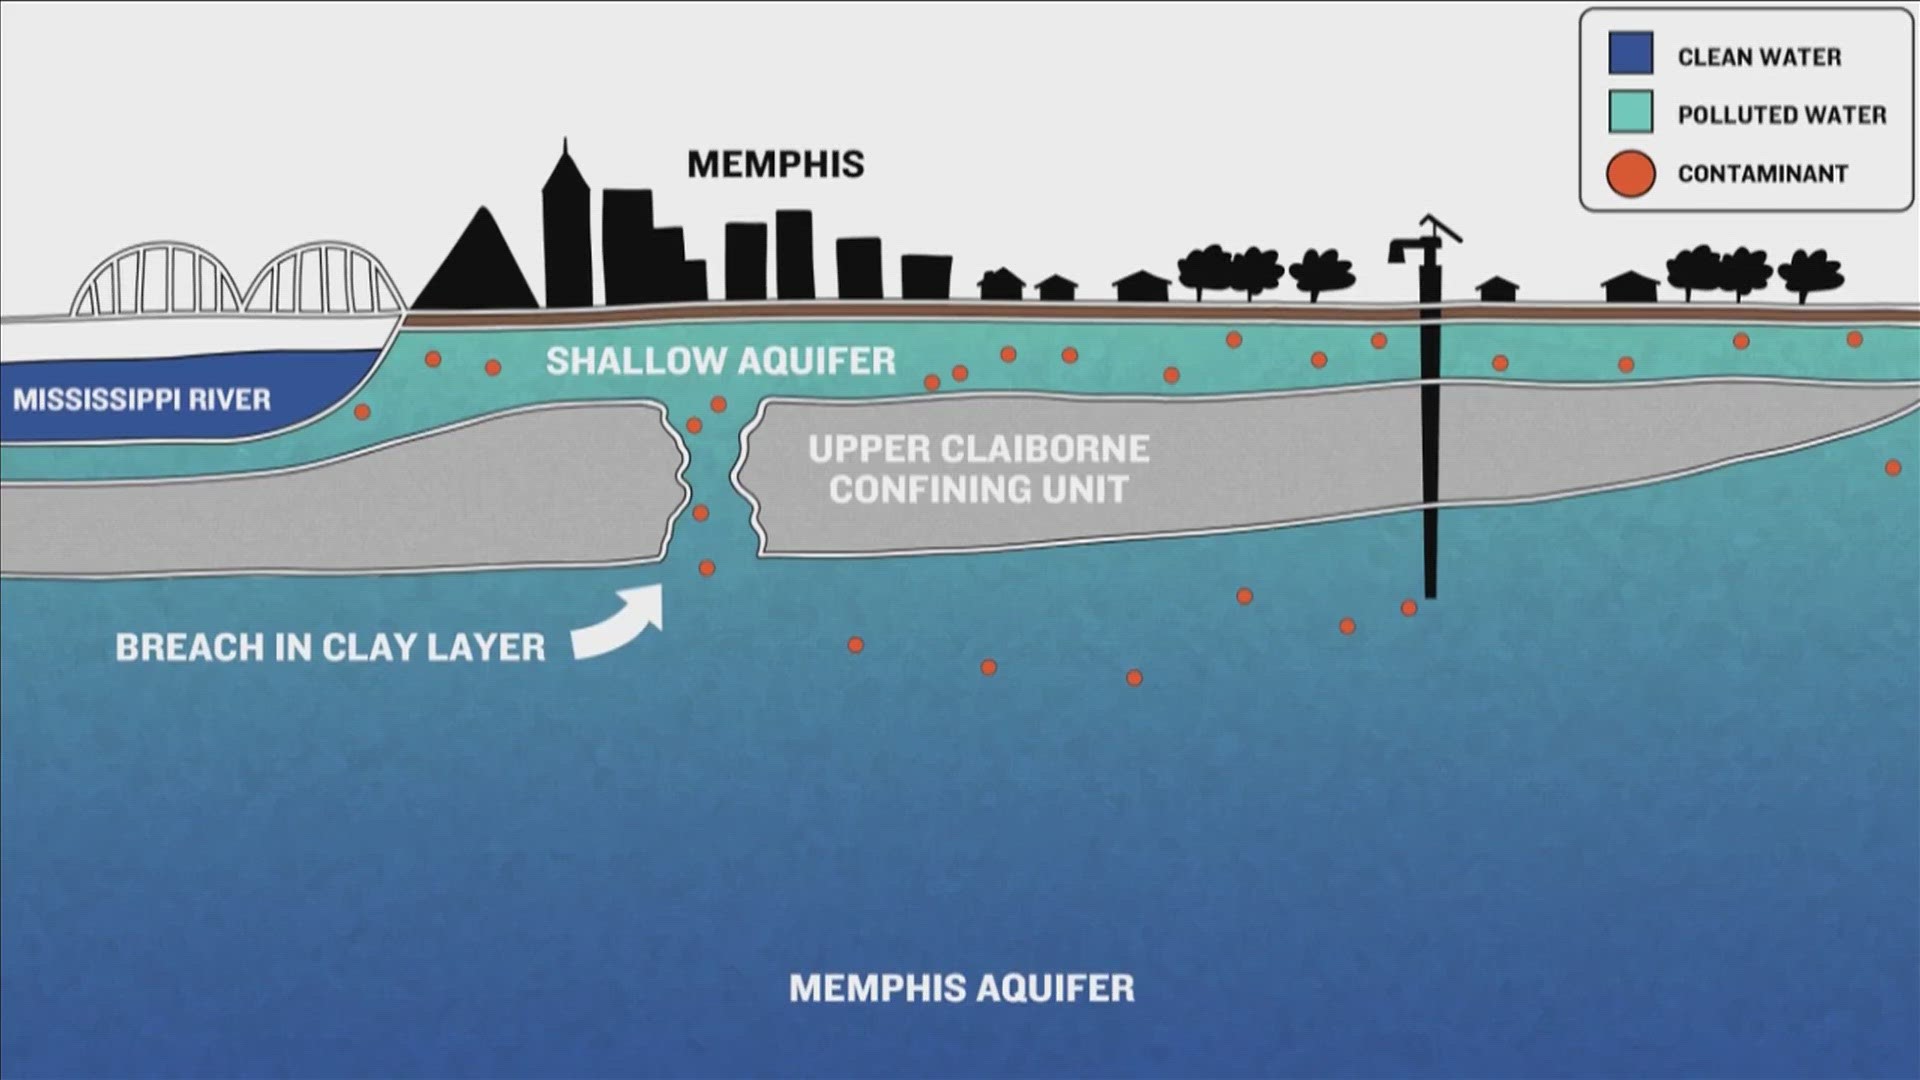 The preliminary report of a study expected to be released next month found more than 23 suspected holes in the clay layer that protects Memphis' drinking water.